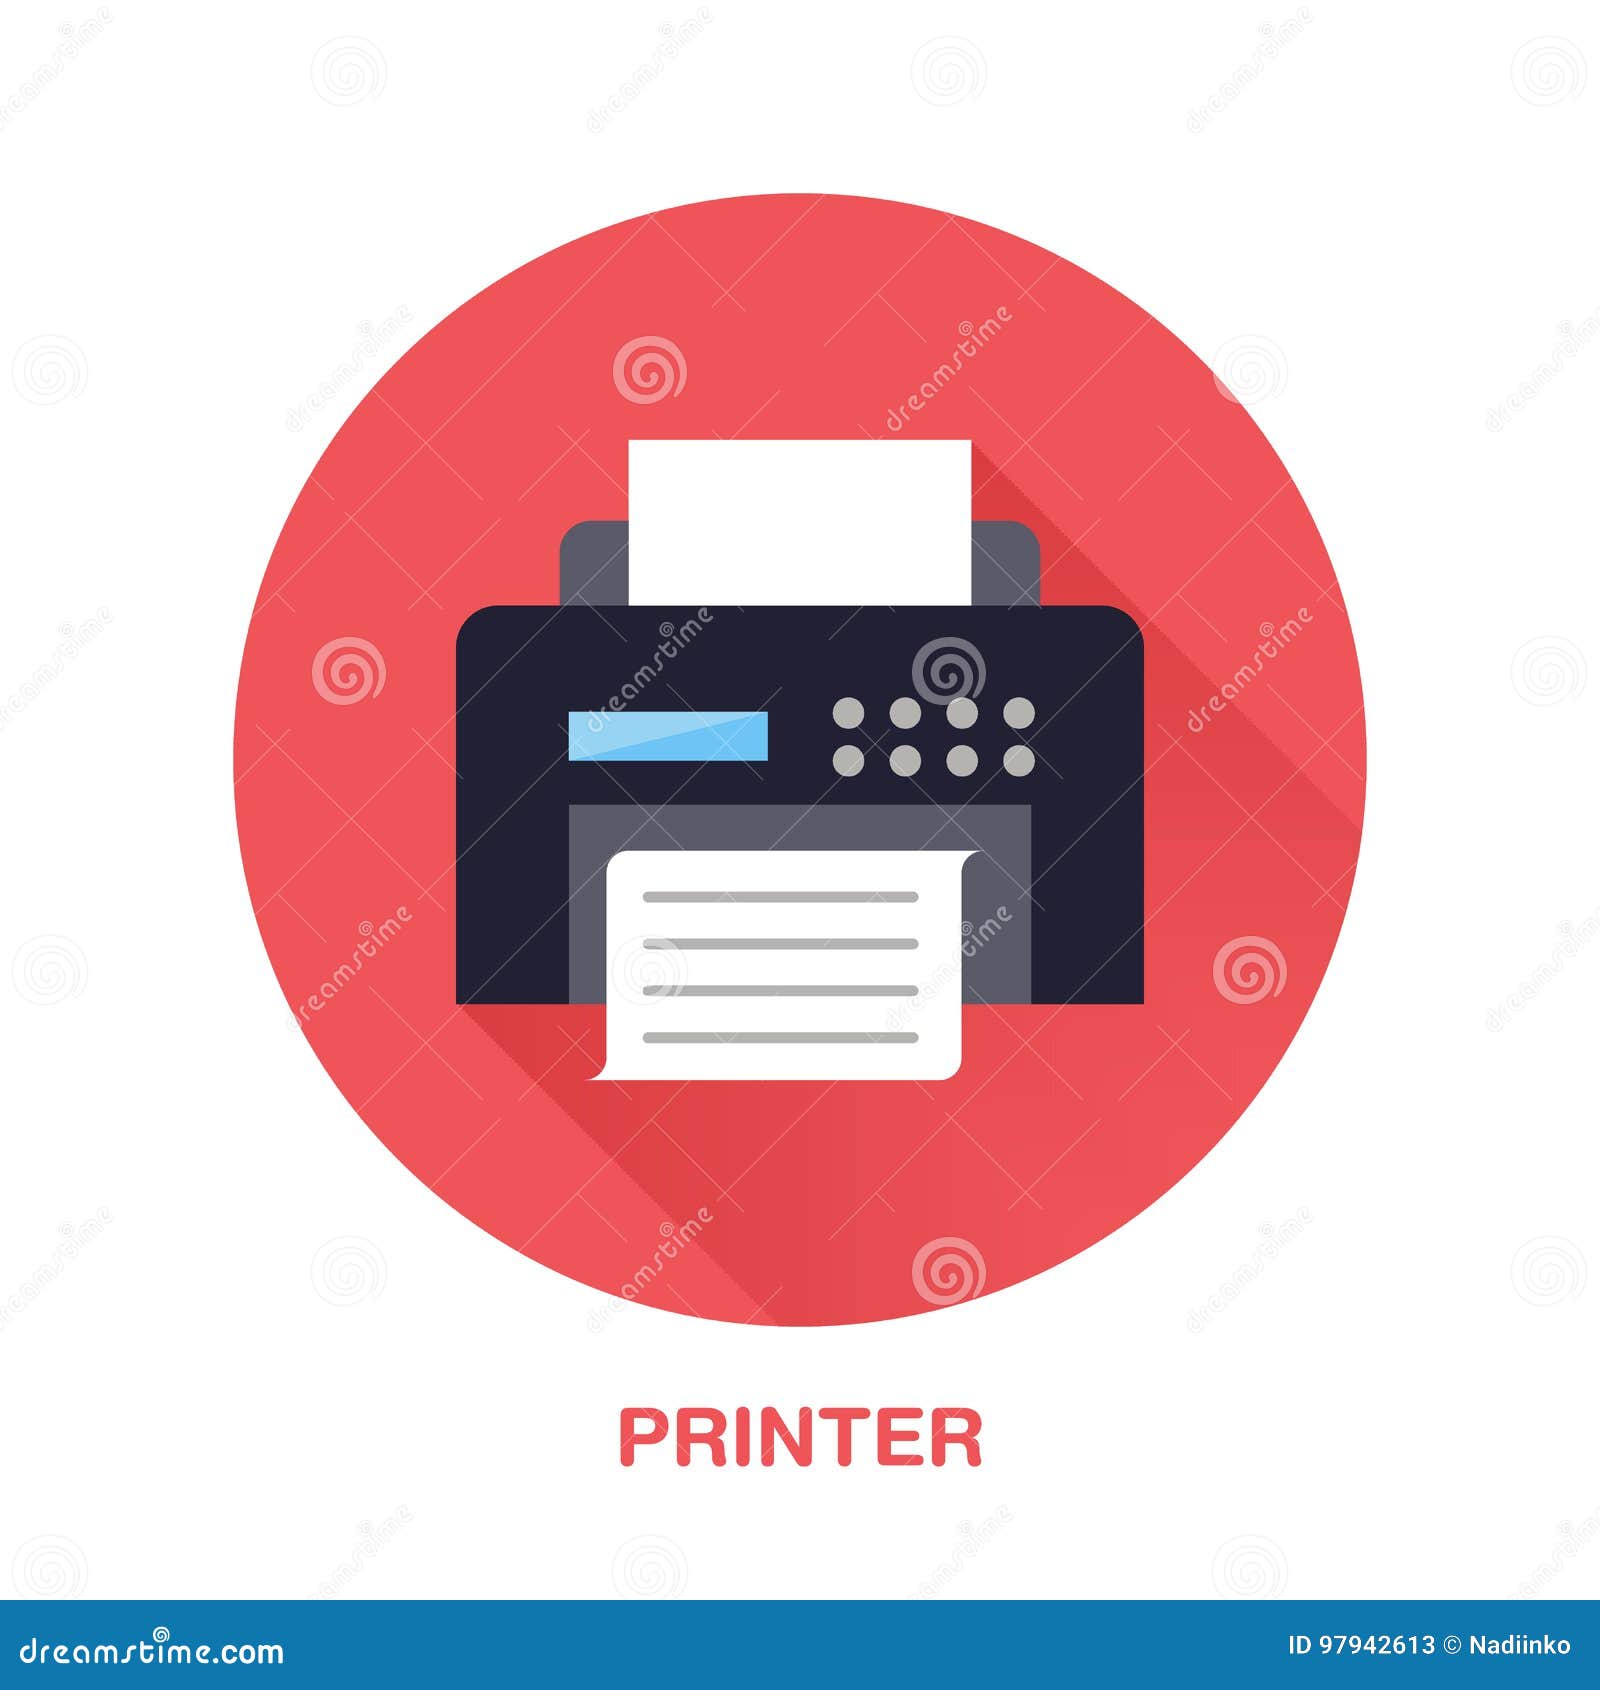 Black Printer with Paper Page Flat Style Icon. Wireless Technology, Office  Equipment Sign Stock Vector - Illustration of gadget, office: 97942613